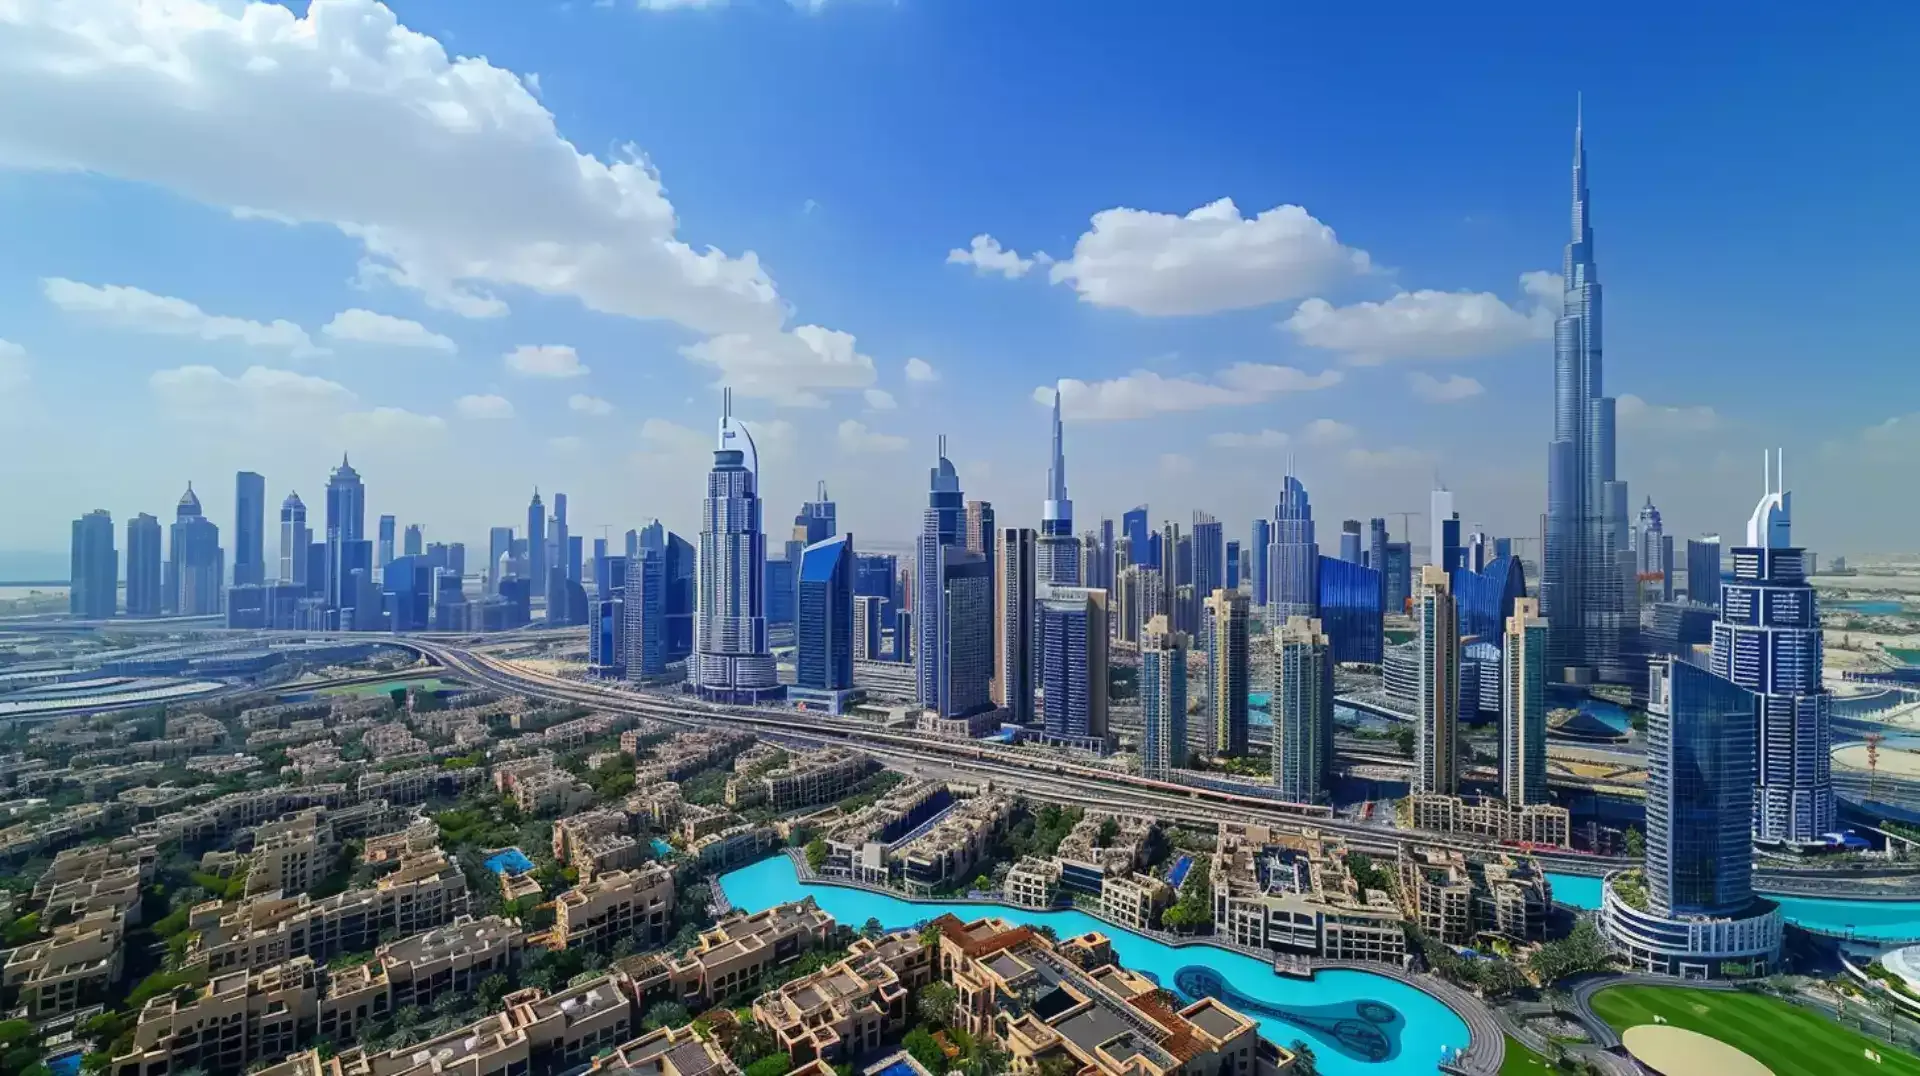 Dubai's Business Centers: Epicenters of Global Trade and Finance